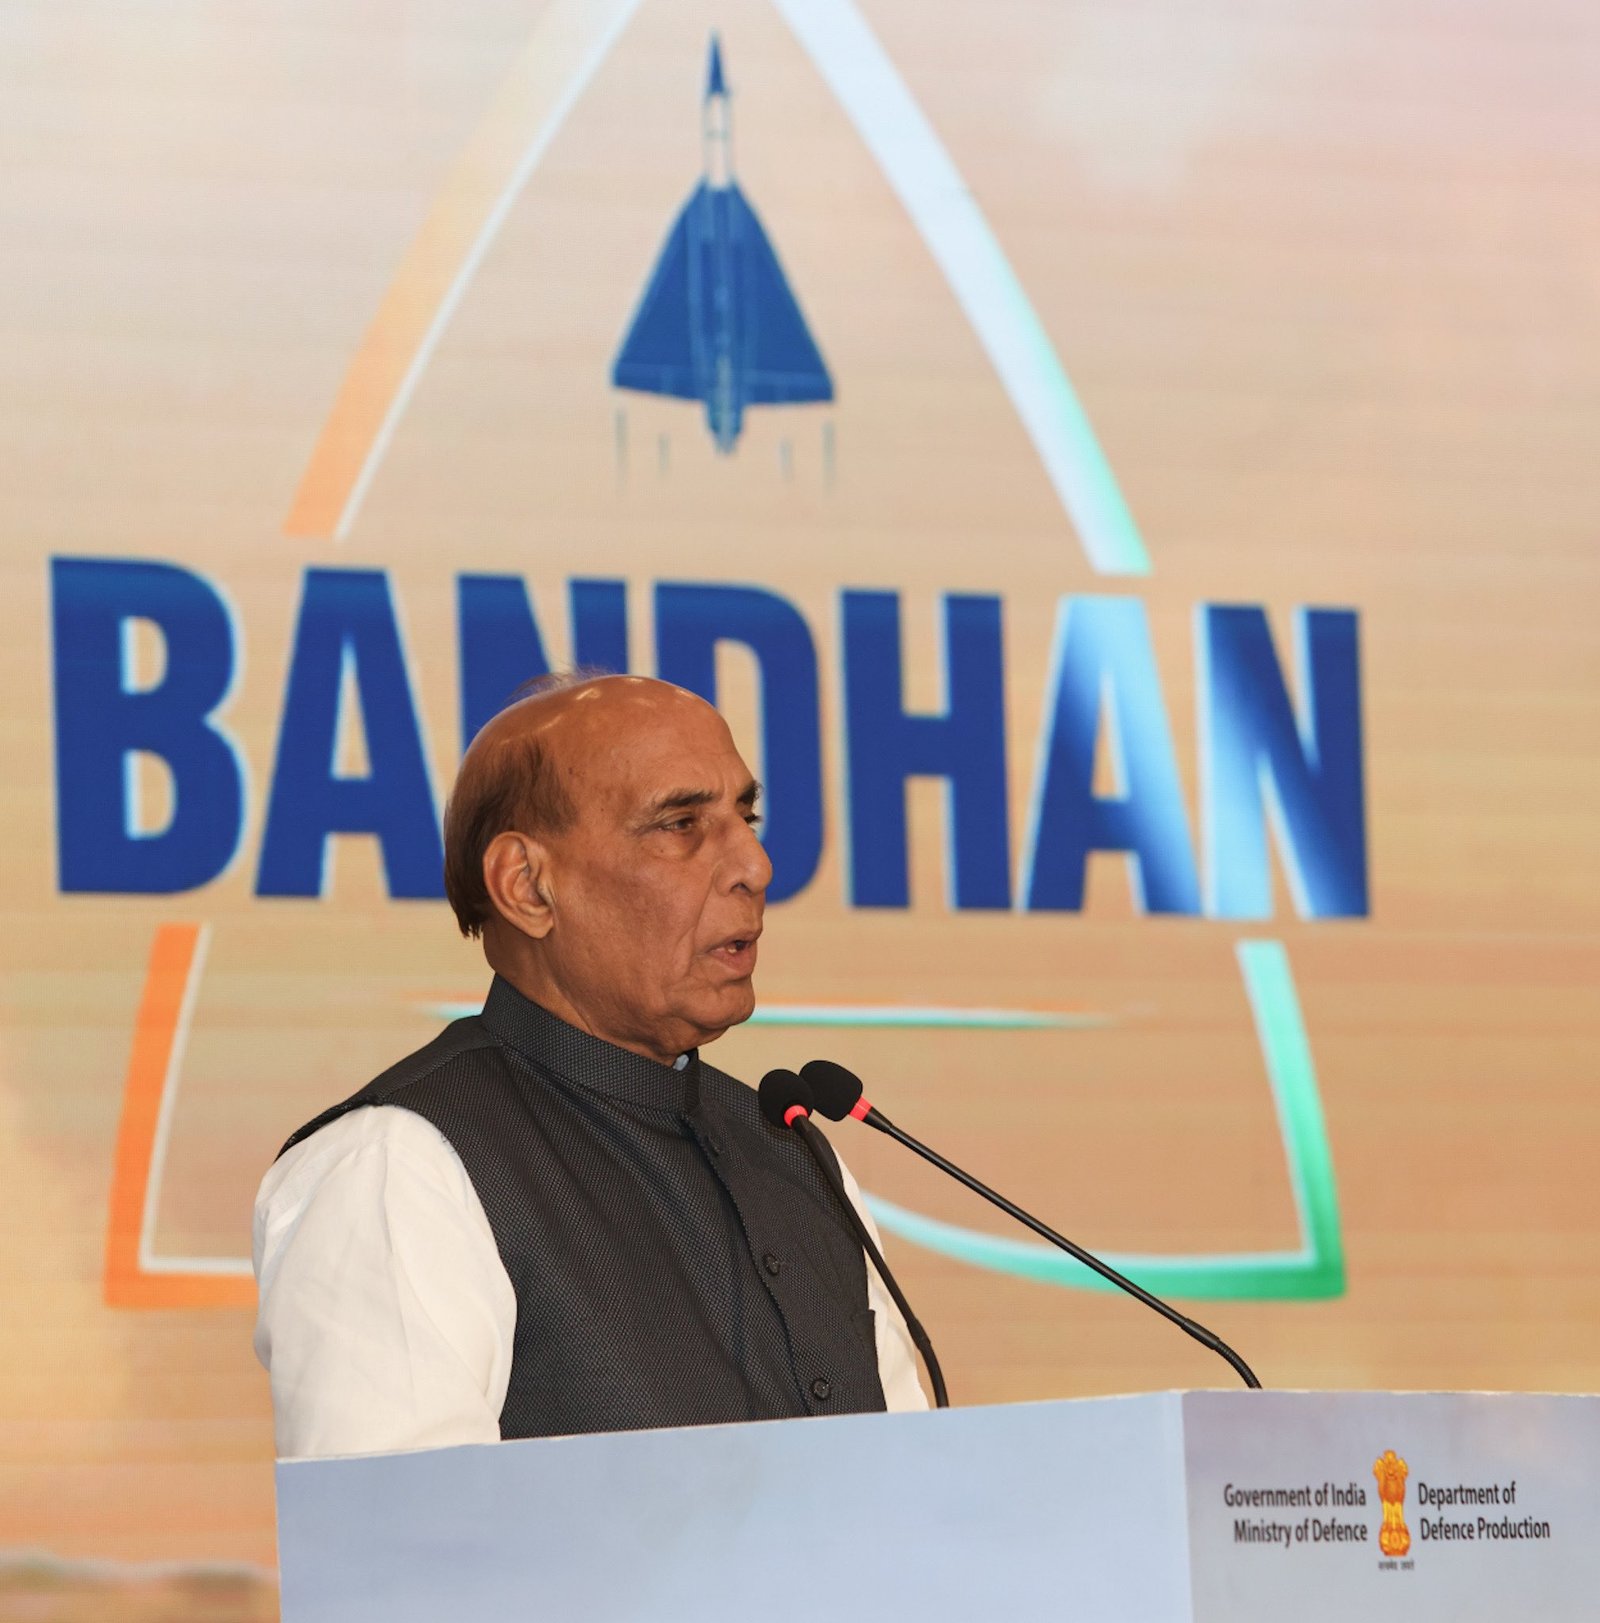 Aero India witnesses 266 partnerships having potential to unlock business worth around Rs 80,000 crore Defence Minister Rajnath Singh at Bandhan